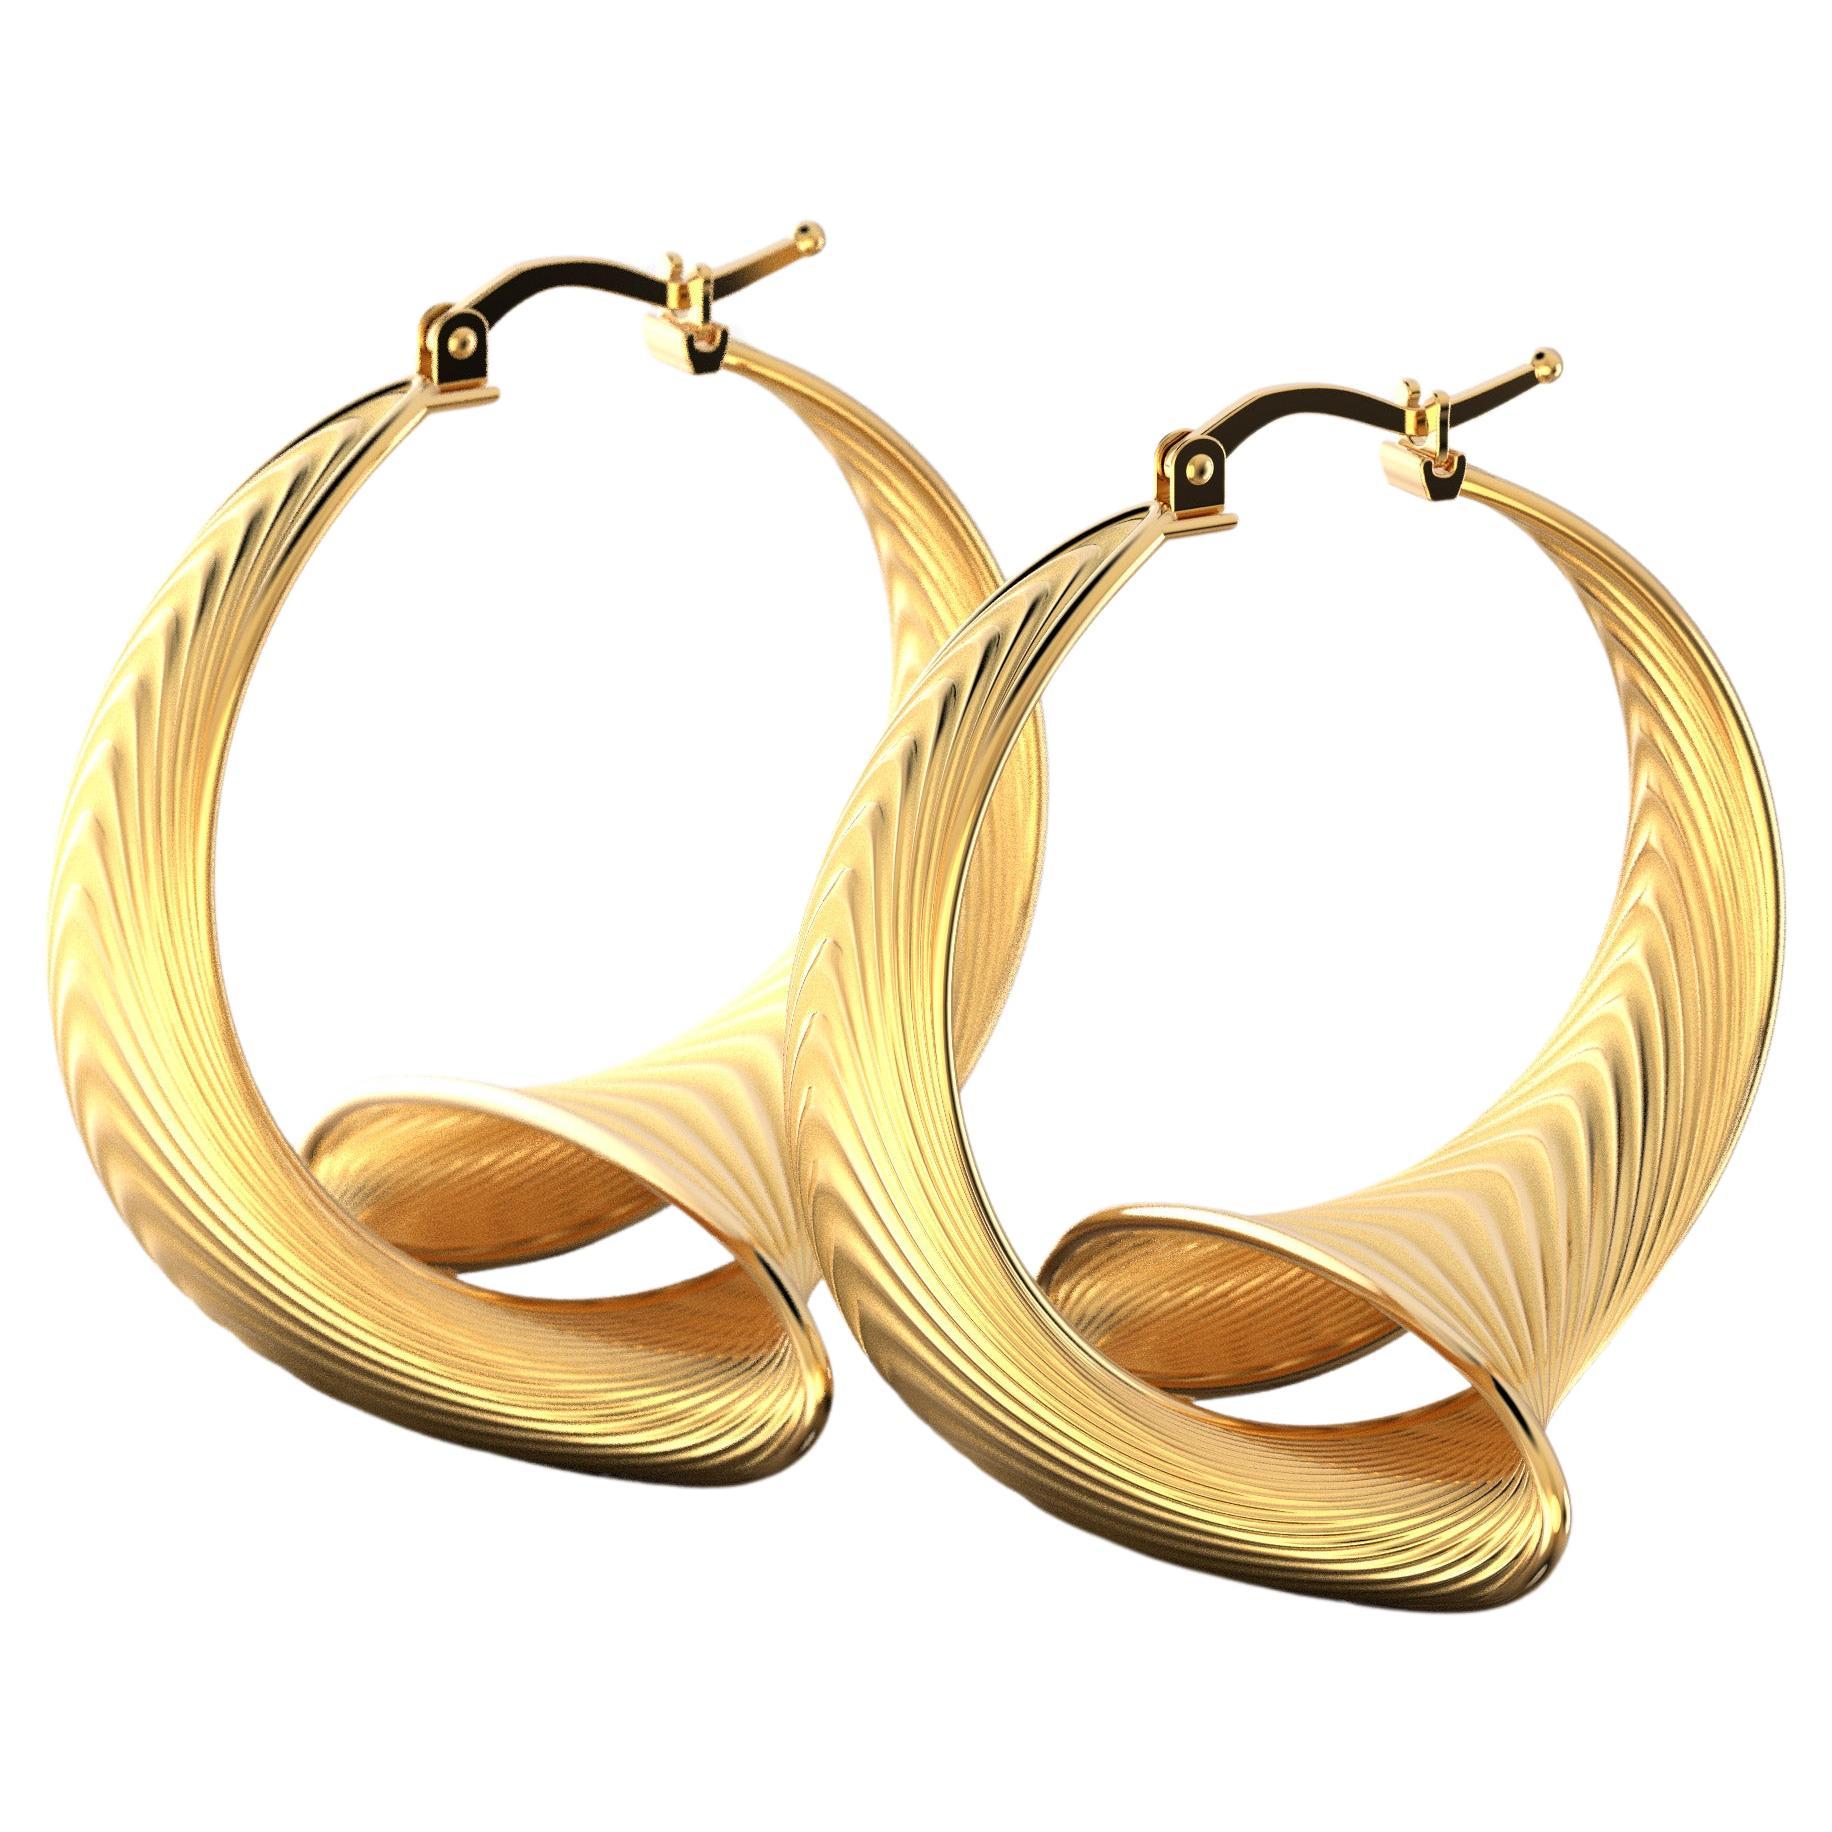  Oltremare Gioielli 14k Gold Hoop Earrings Made in Italy, Italian Fine Jewelry  For Sale